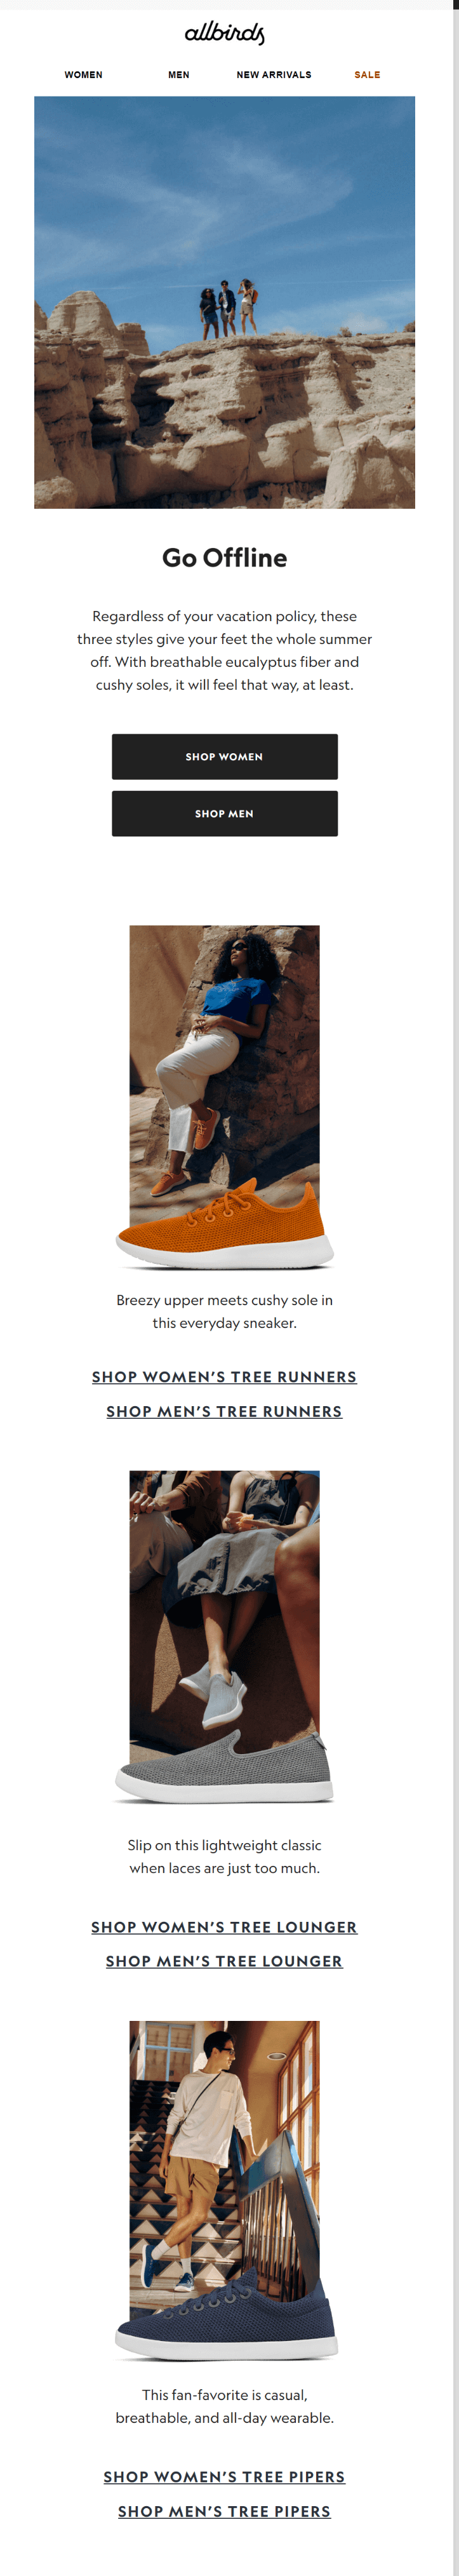 An accessible email from Allbirds with good amount of breathing space between pictures, short copy paragraphs, and links